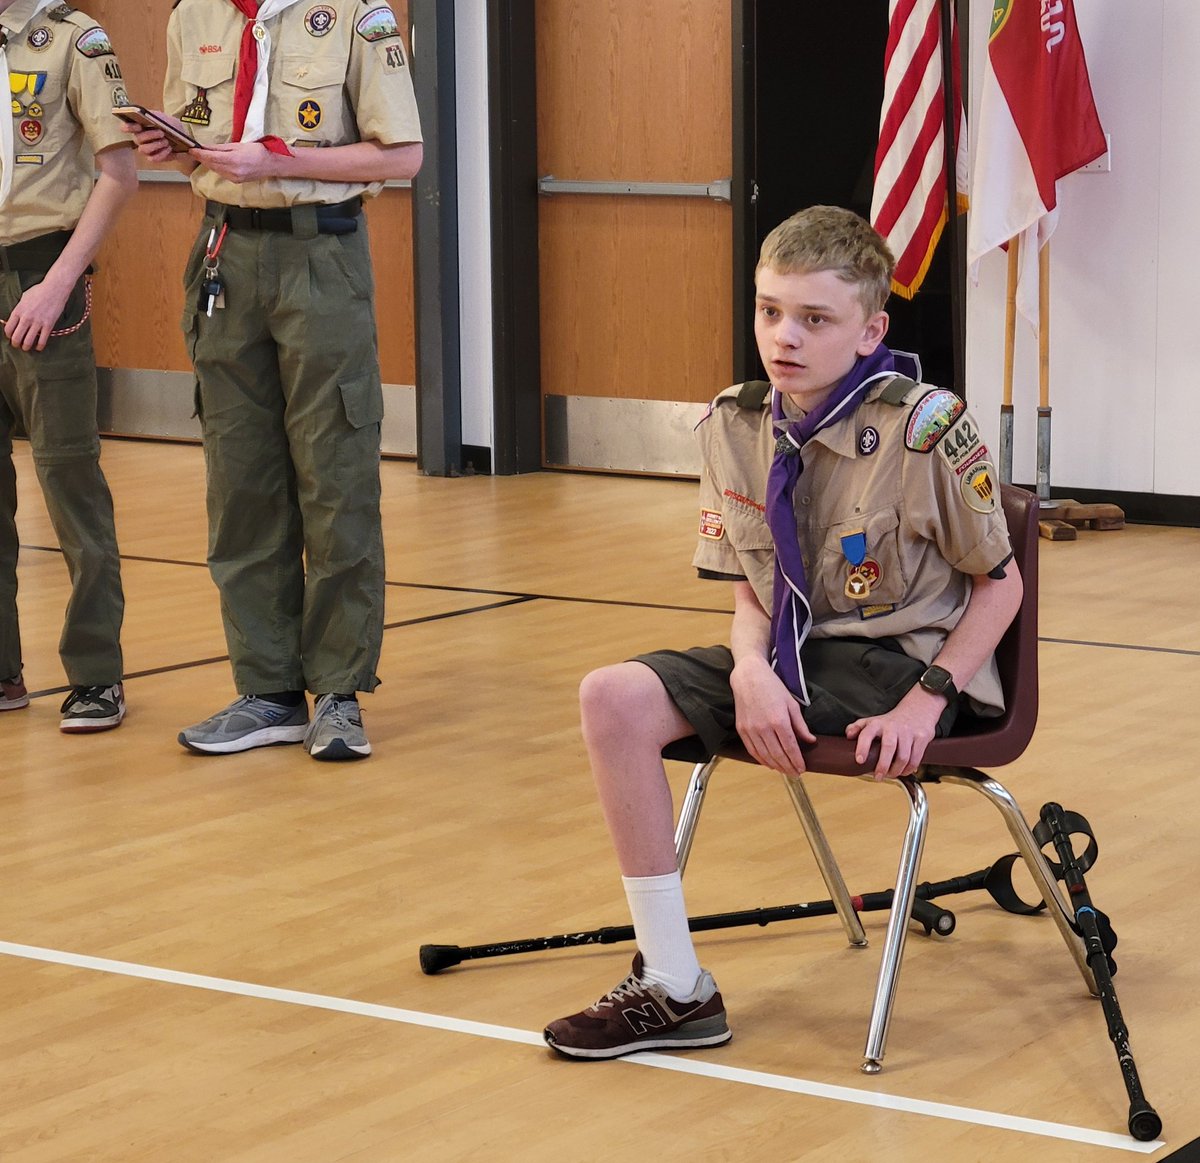 T speaking about NF and his disability to a scout troop. Raising awareness and acceptance for this with different abilities. 

#imwithTravis #amputee #seetheability #awareness #MoreNotLess #ikNowaFighter #EndNF